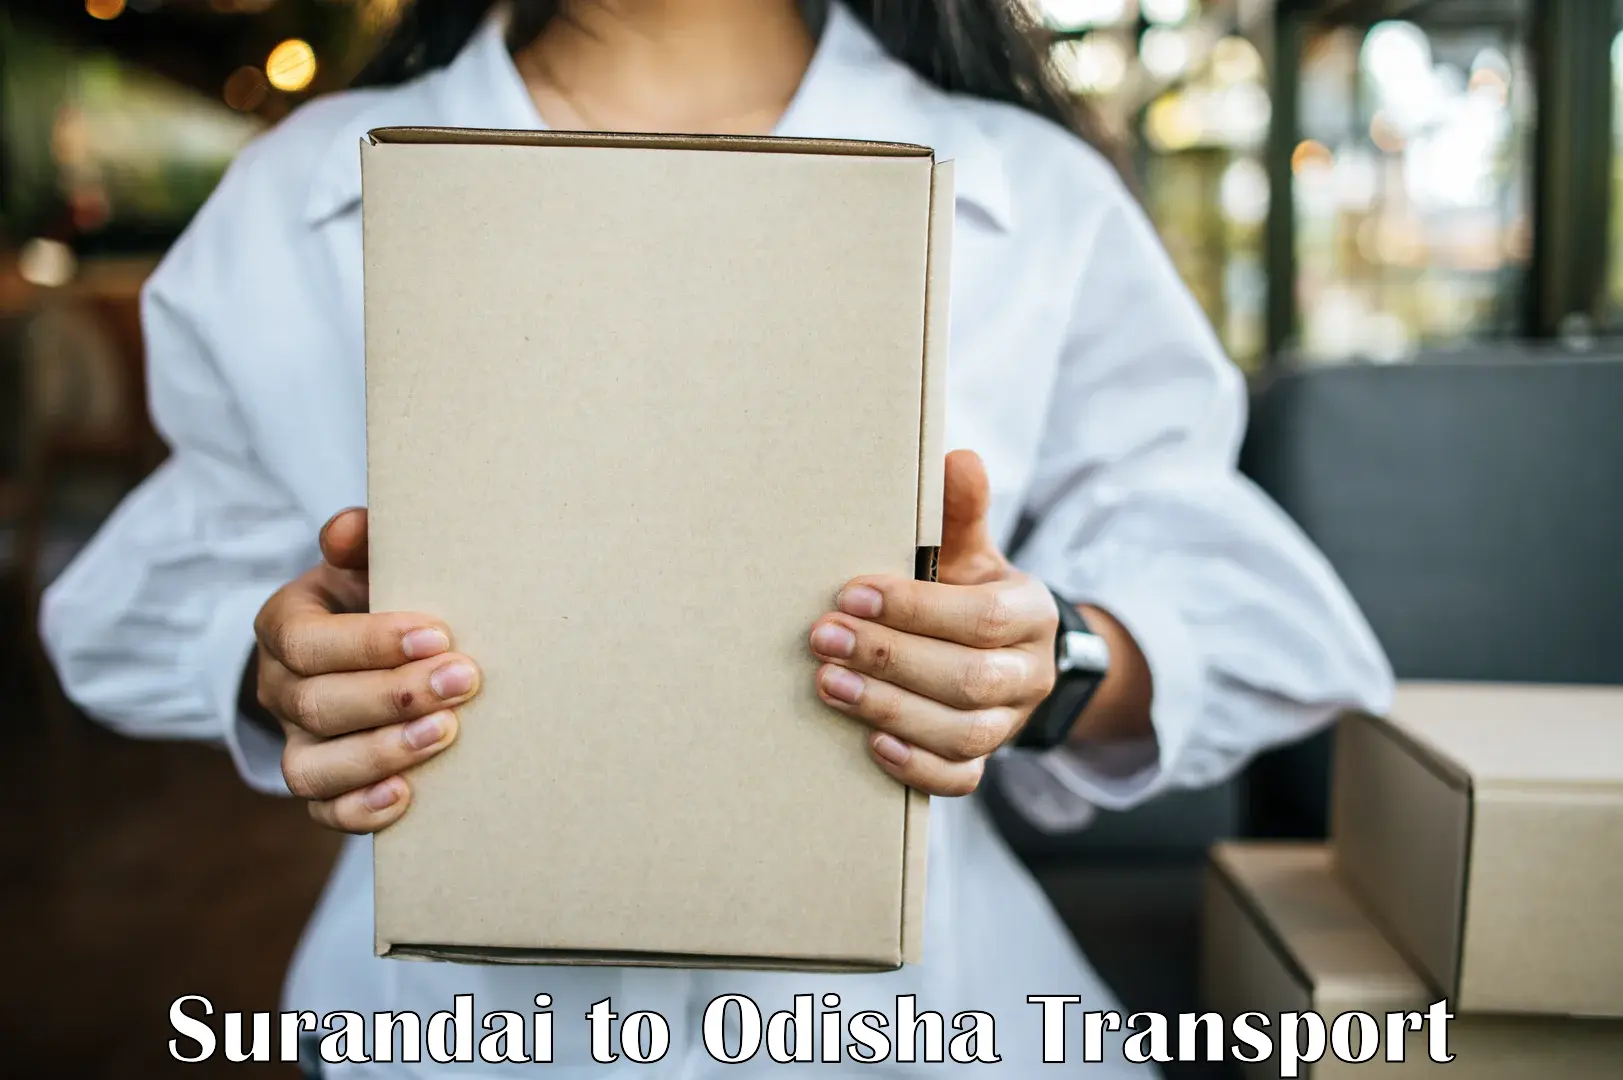 Best transport services in India Surandai to Kotapad